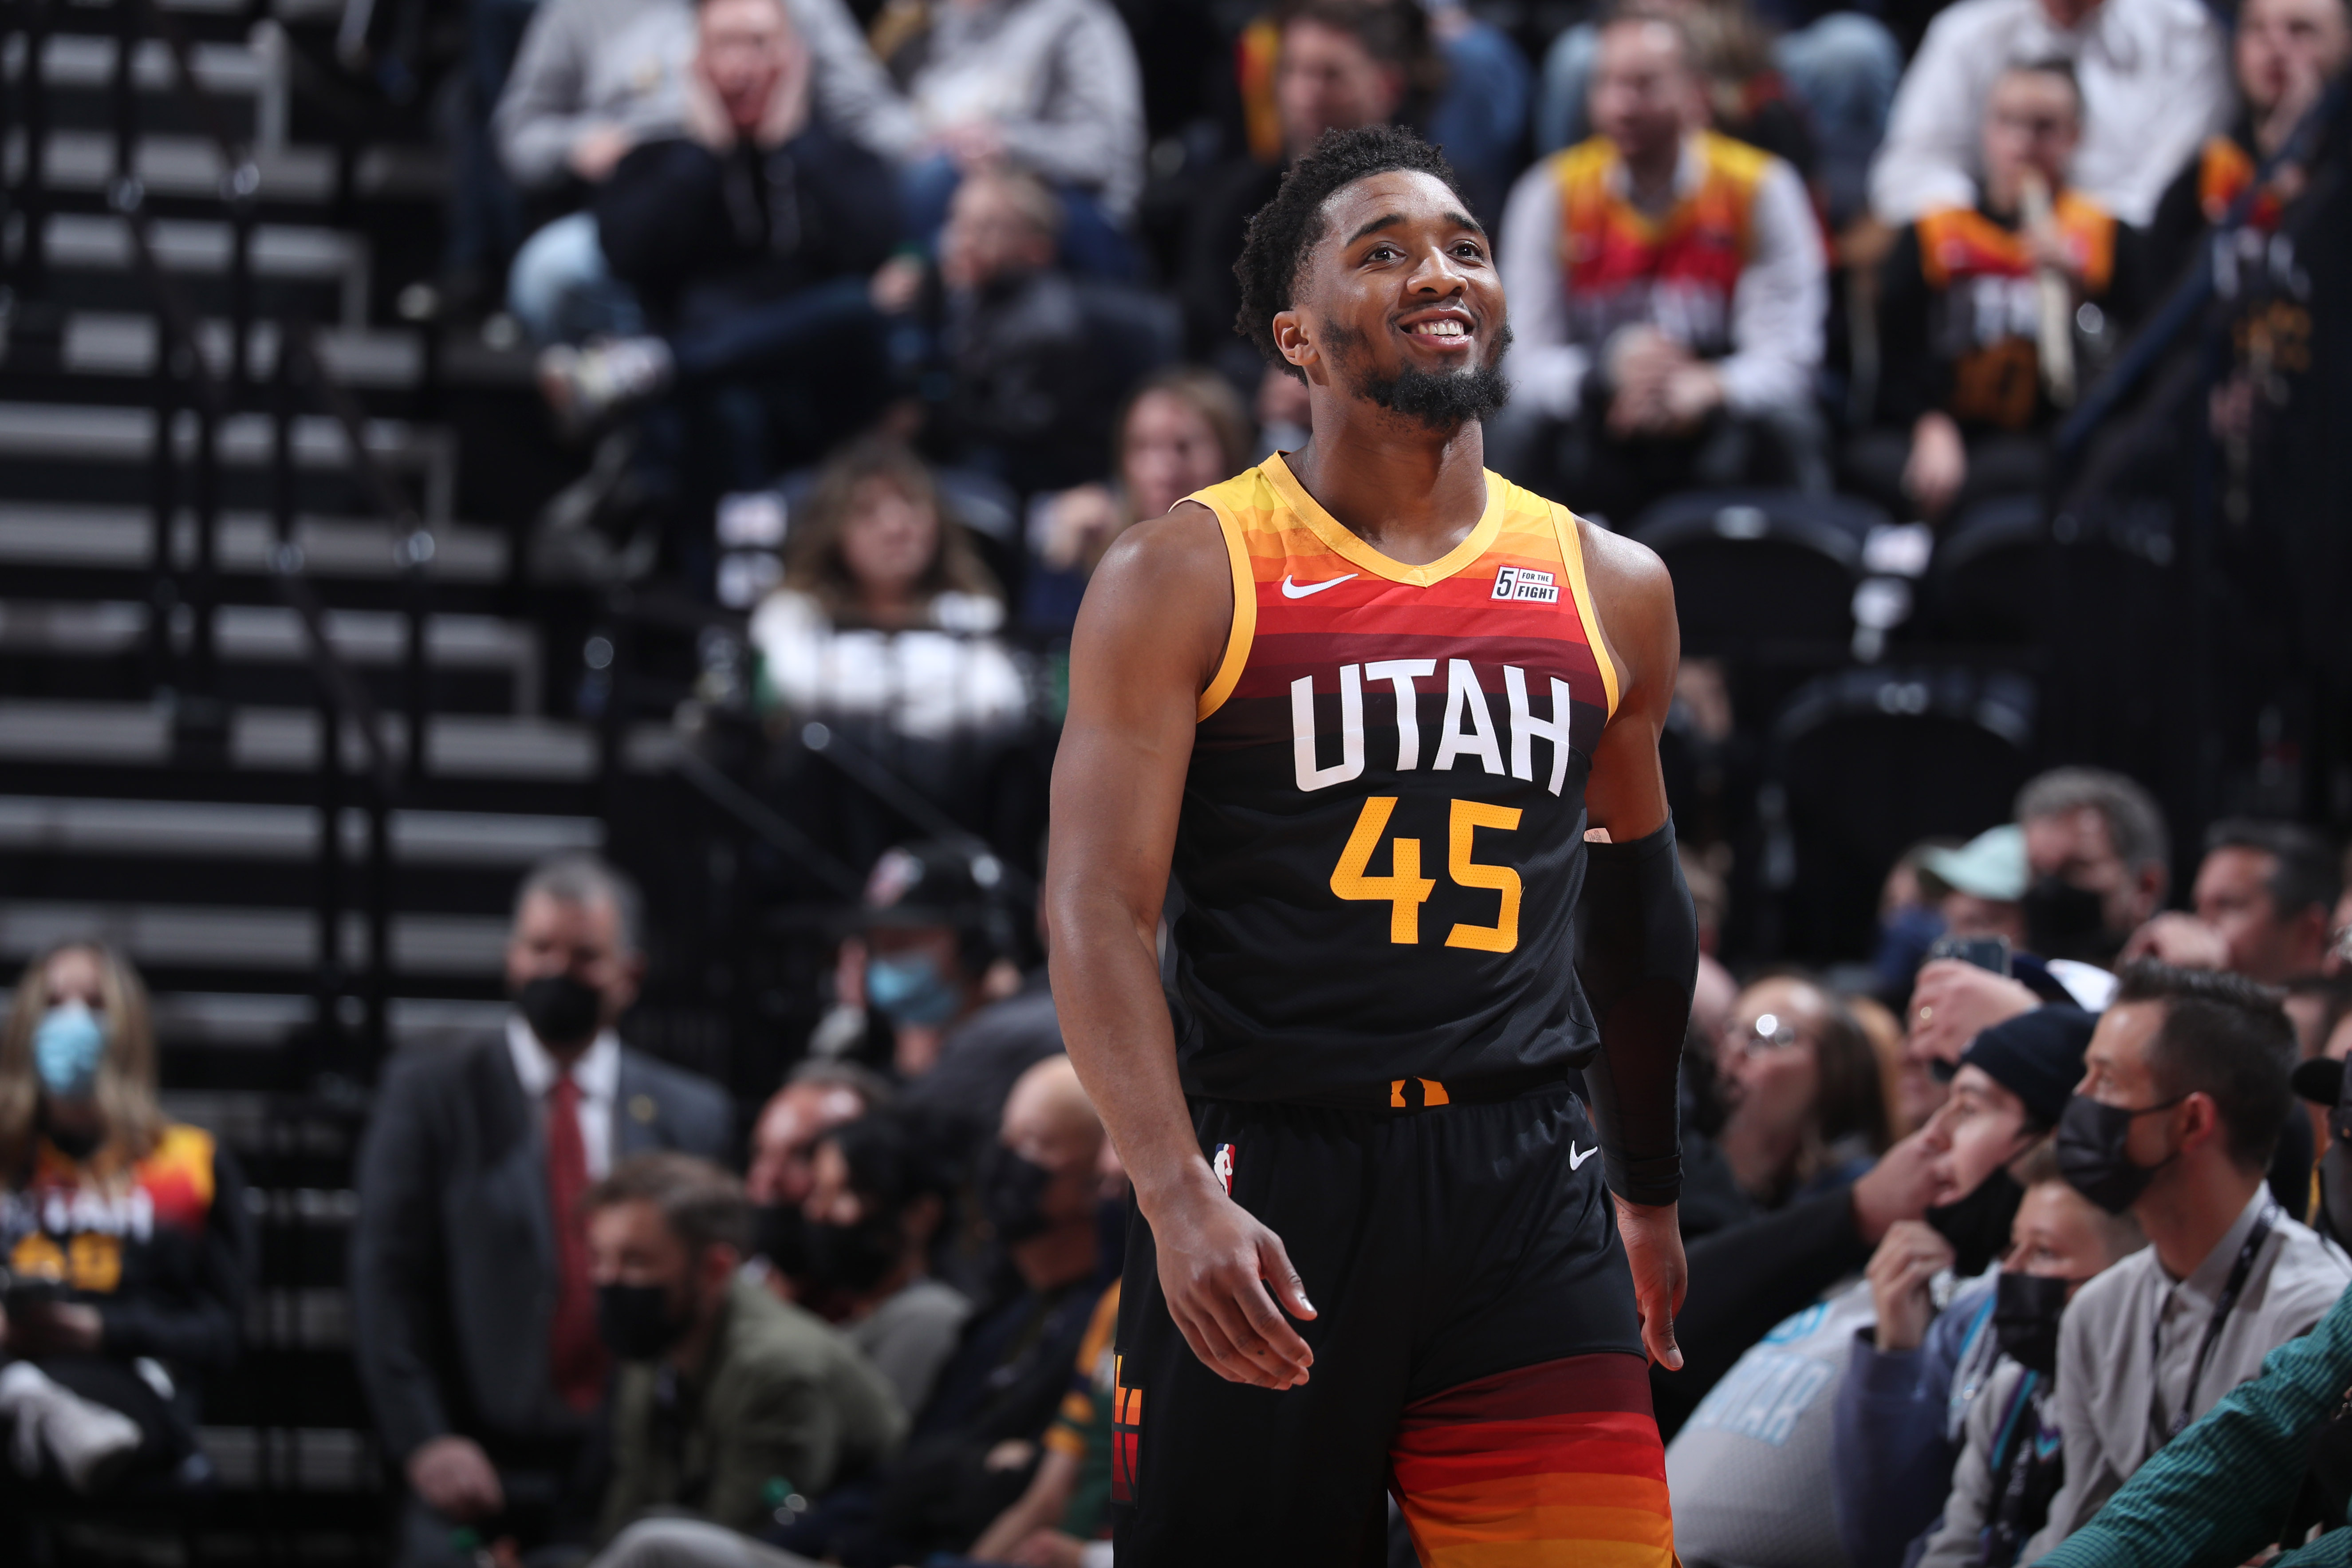 Knicks Rumors: Donovan Mitchell Trade Being Plotted by Exec VP William Wesley